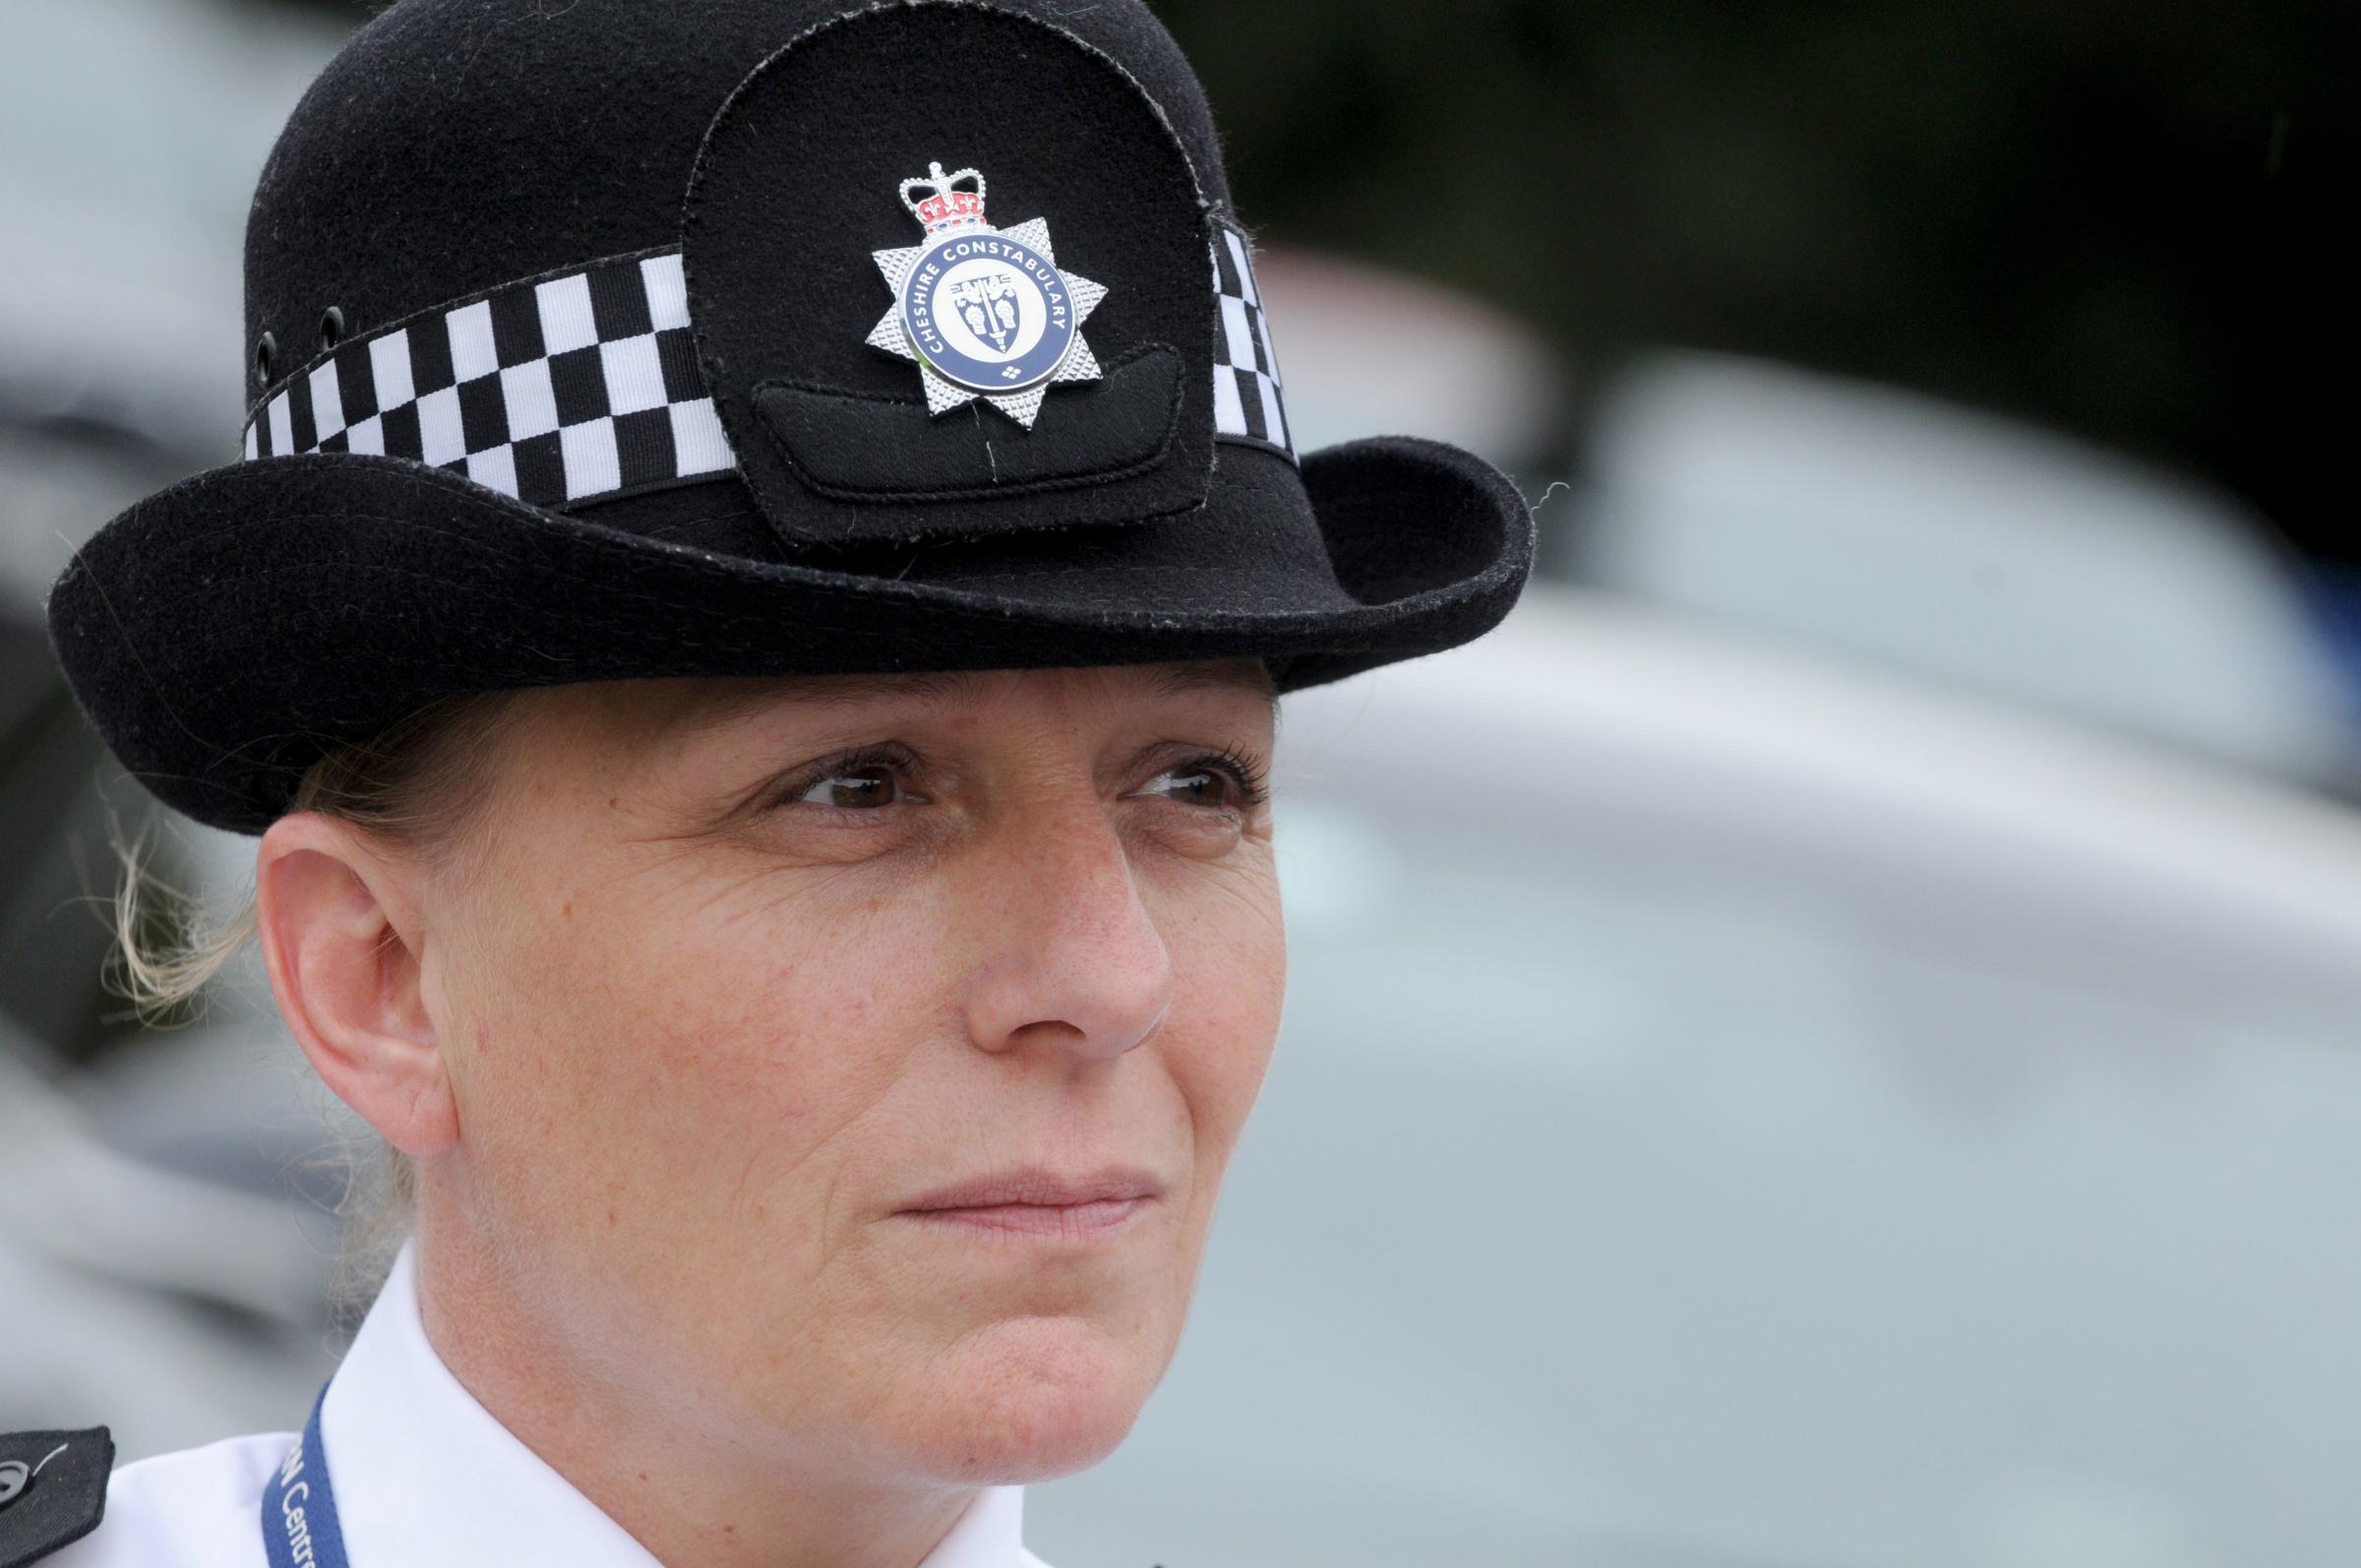 Superintendent Sarah Heath, from Cheshire Police (Image: Dave Gillespie)